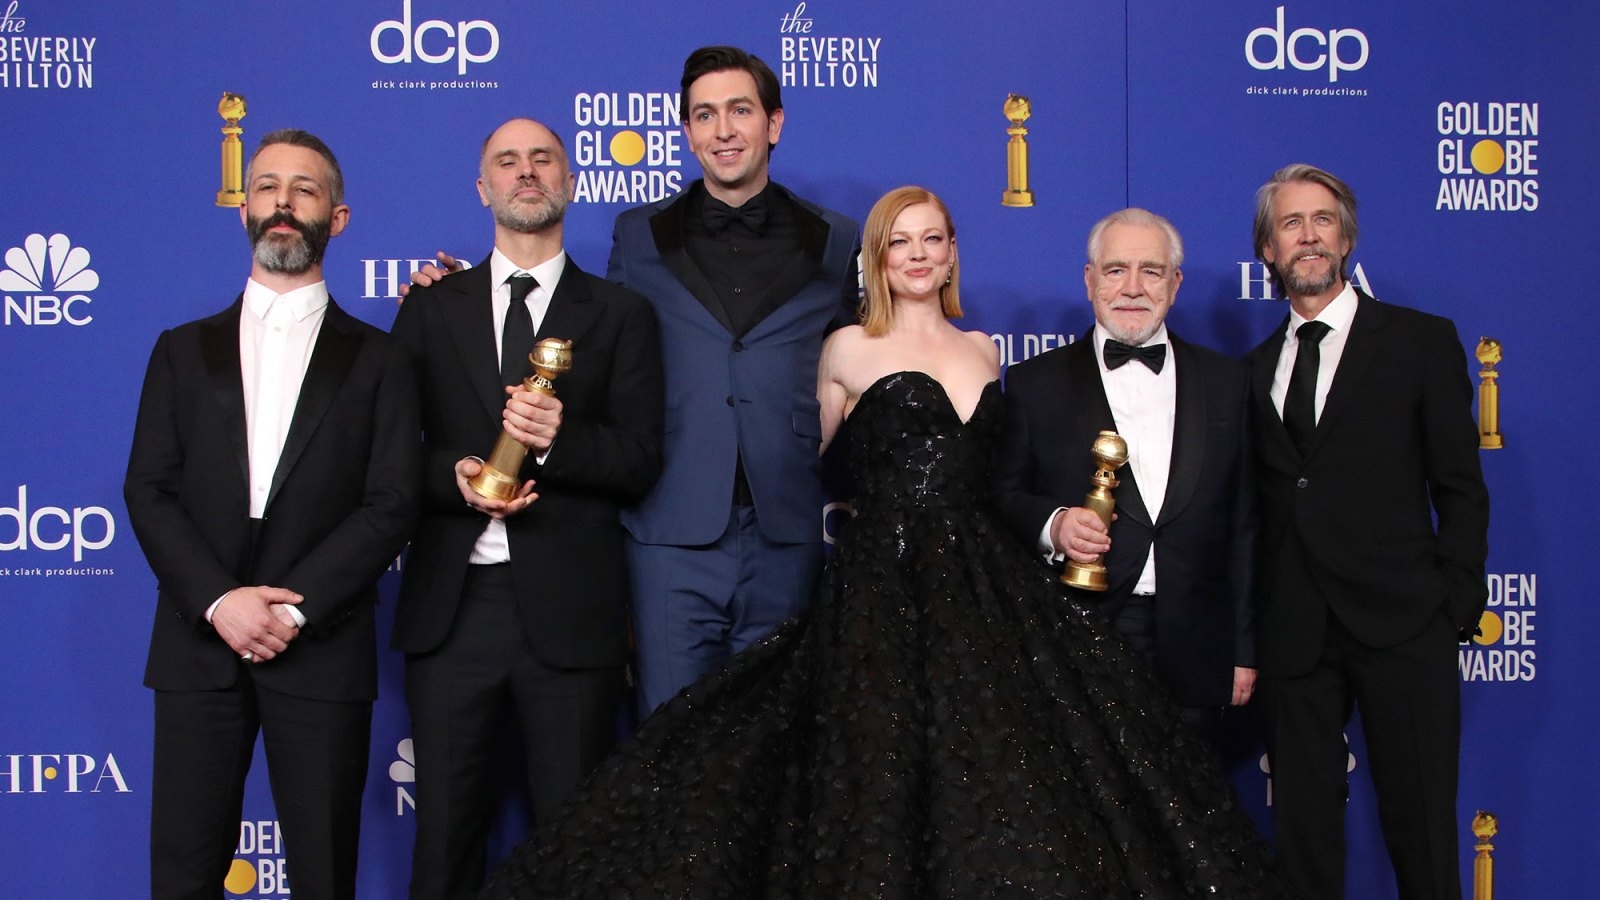 Golden Globes 2022: A Round-Up Of The Nominations